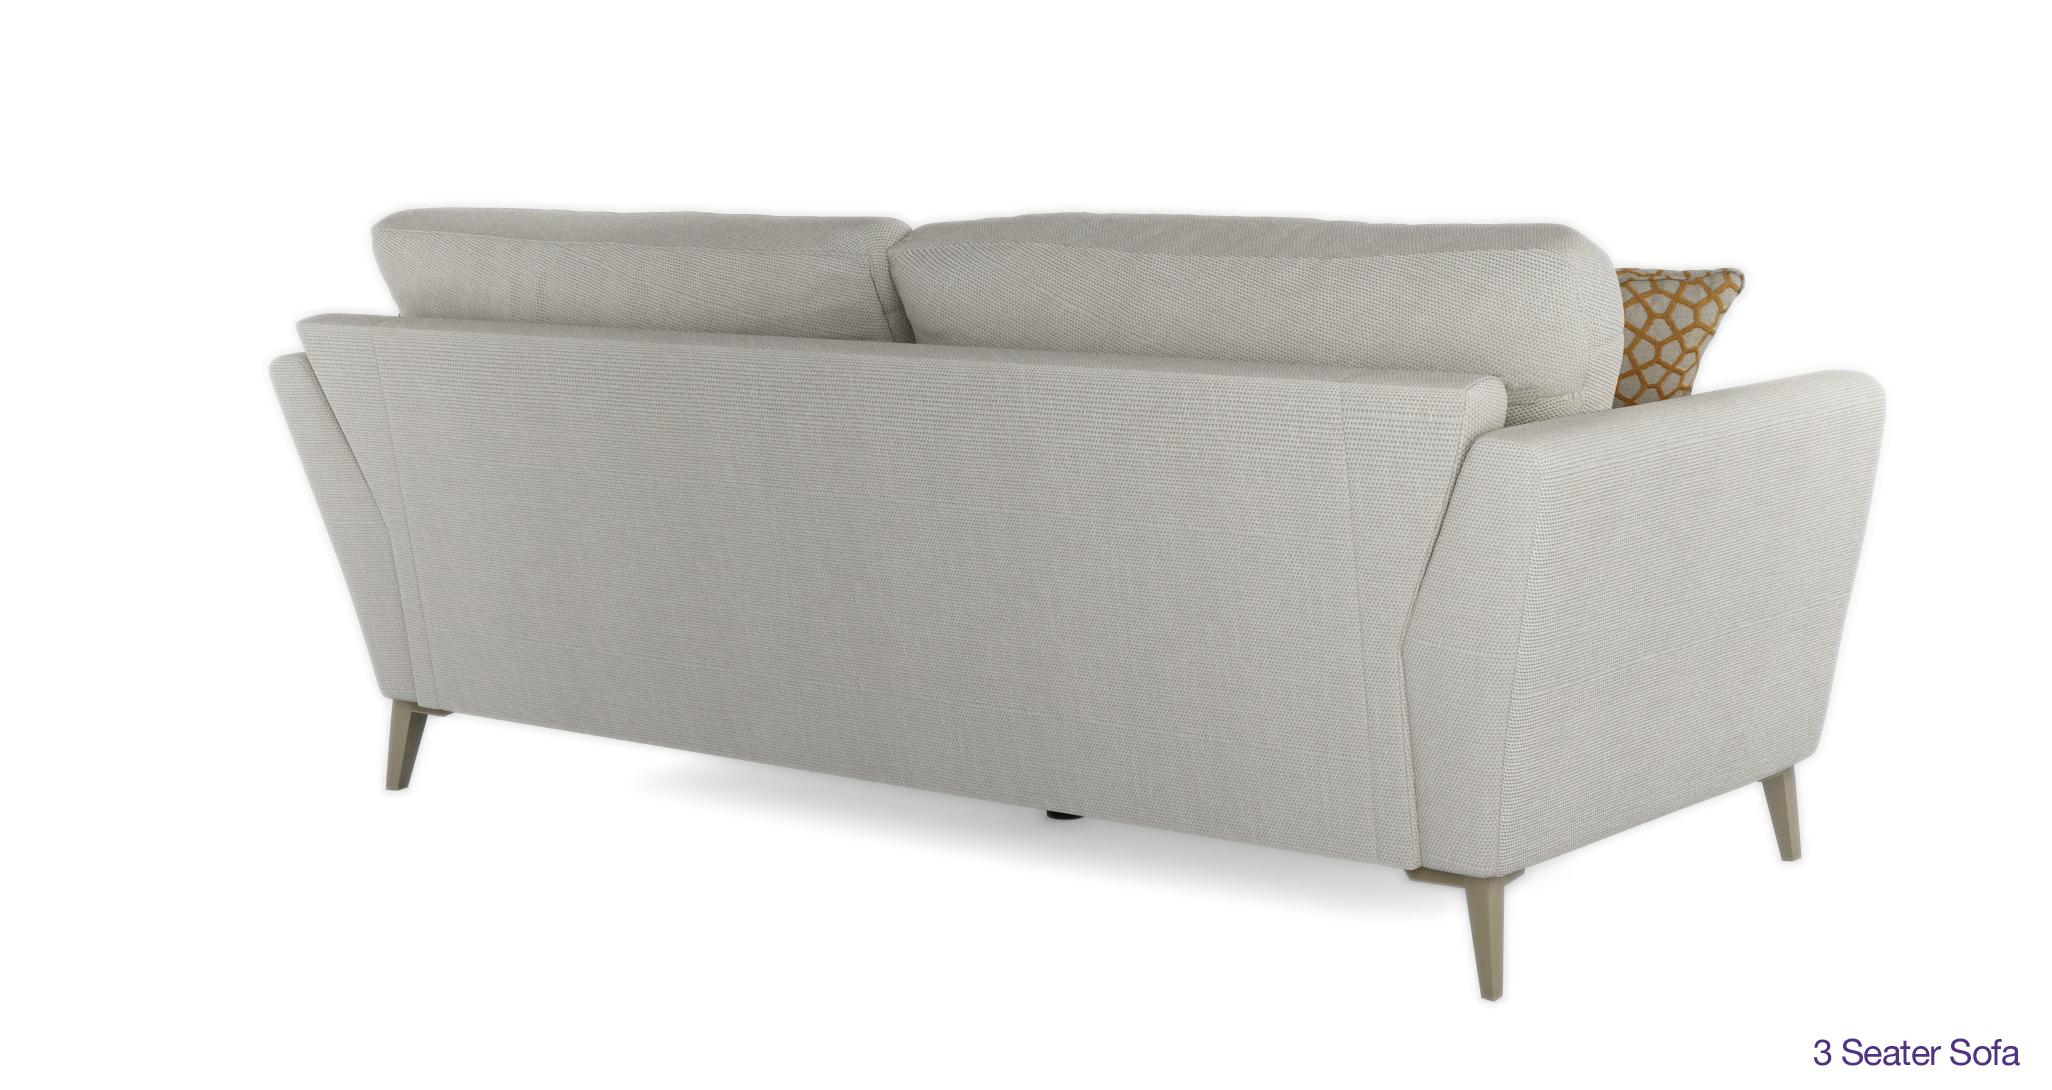 DFS Corner Sofa Libby Is The Perfect Family Sofa To Lounge On